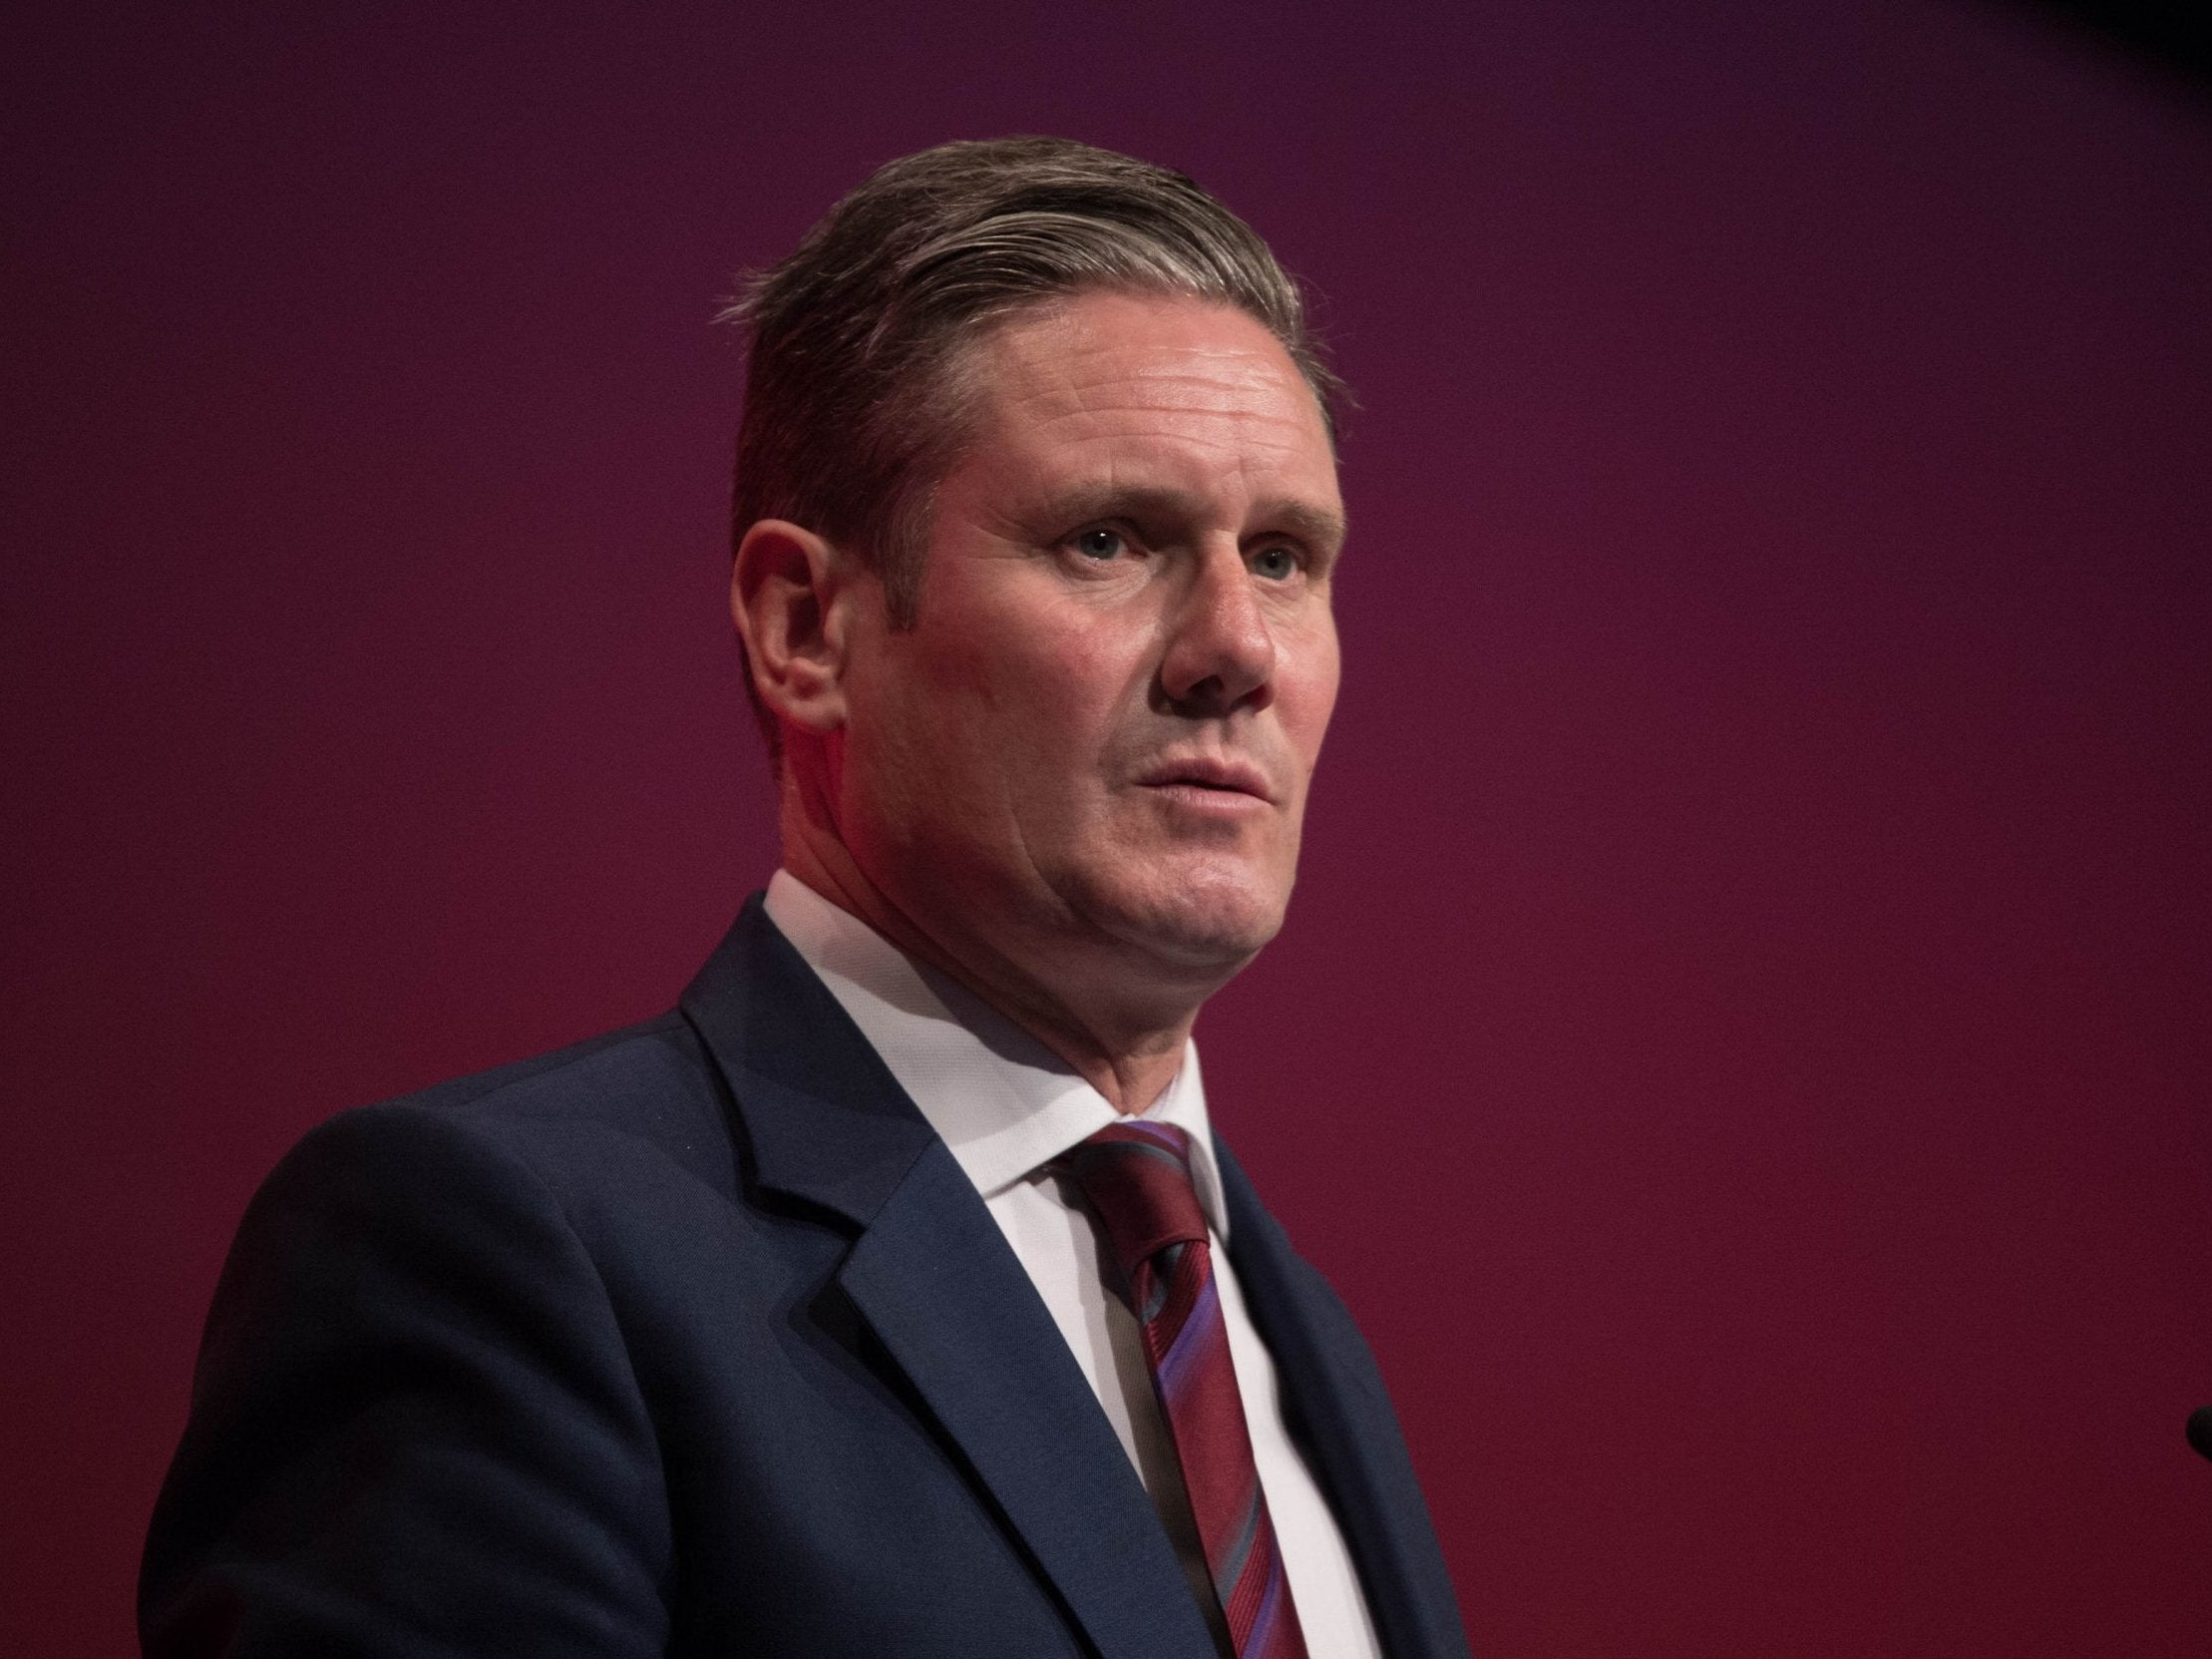 Labour leader Sir Keir Starmer will be undone by an ageing population